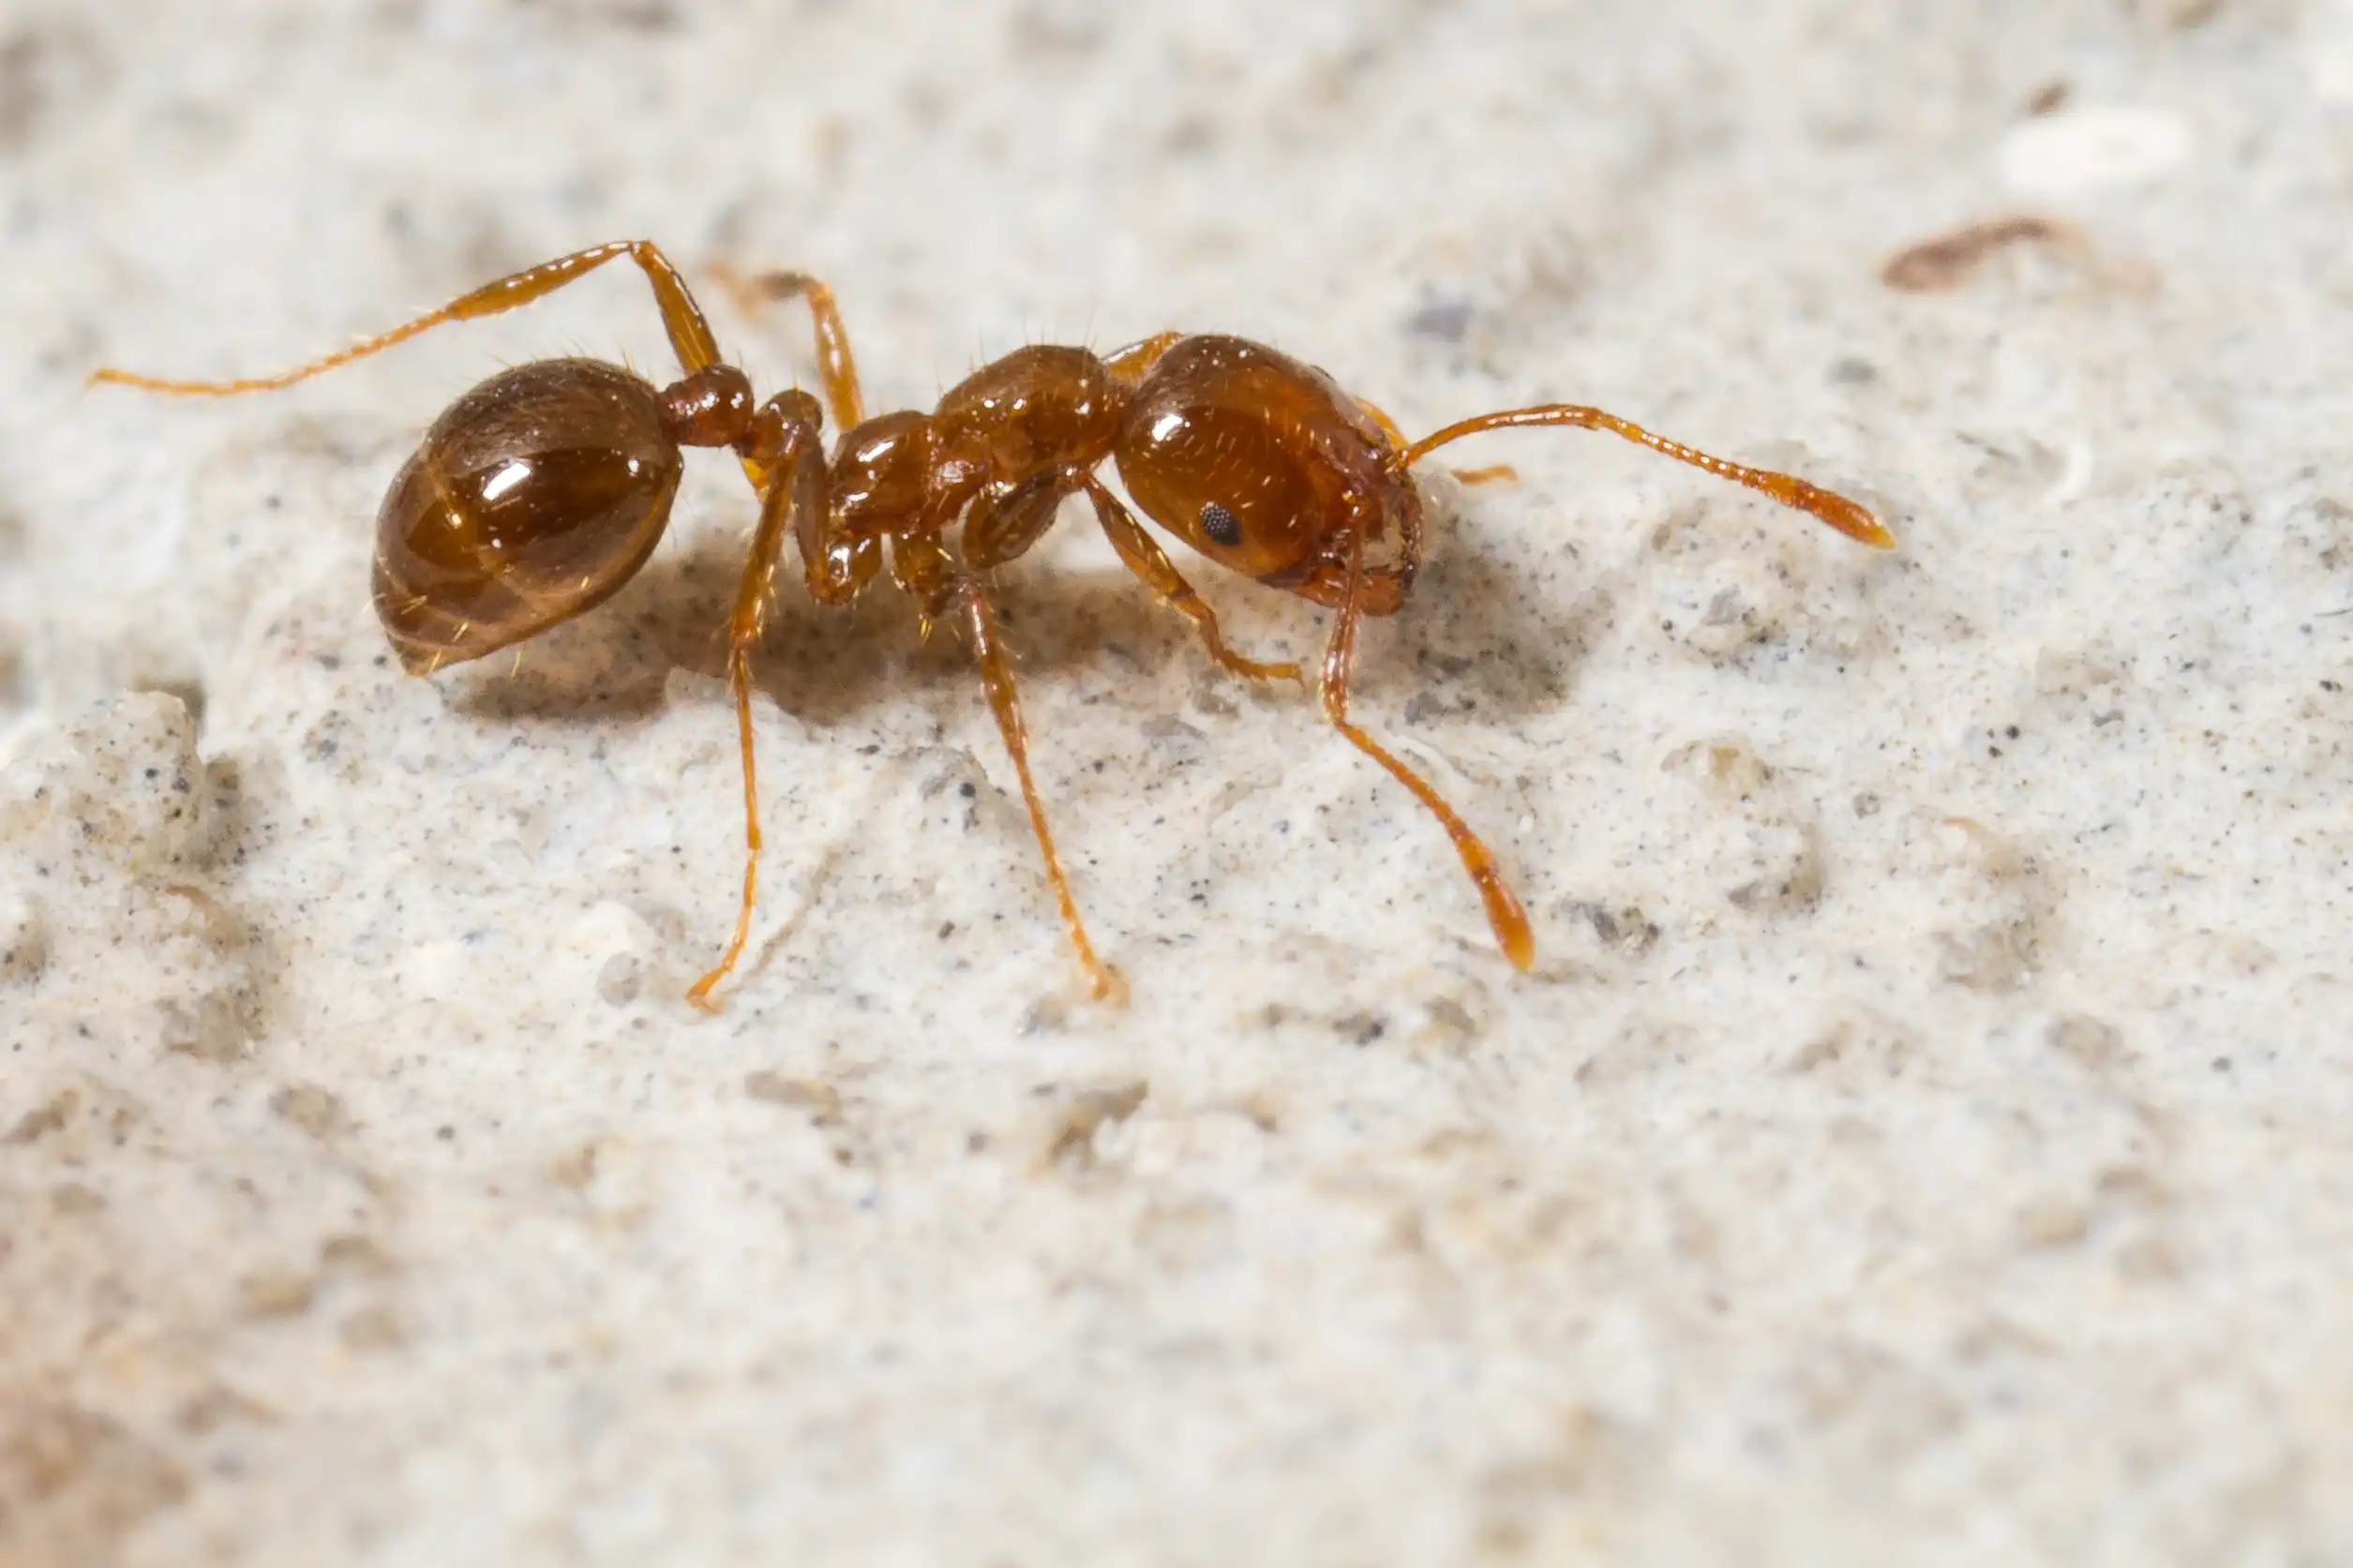 Red imported ant crawling on a rock - keep red imported ants away from your home with Heron home & outdoor in FL